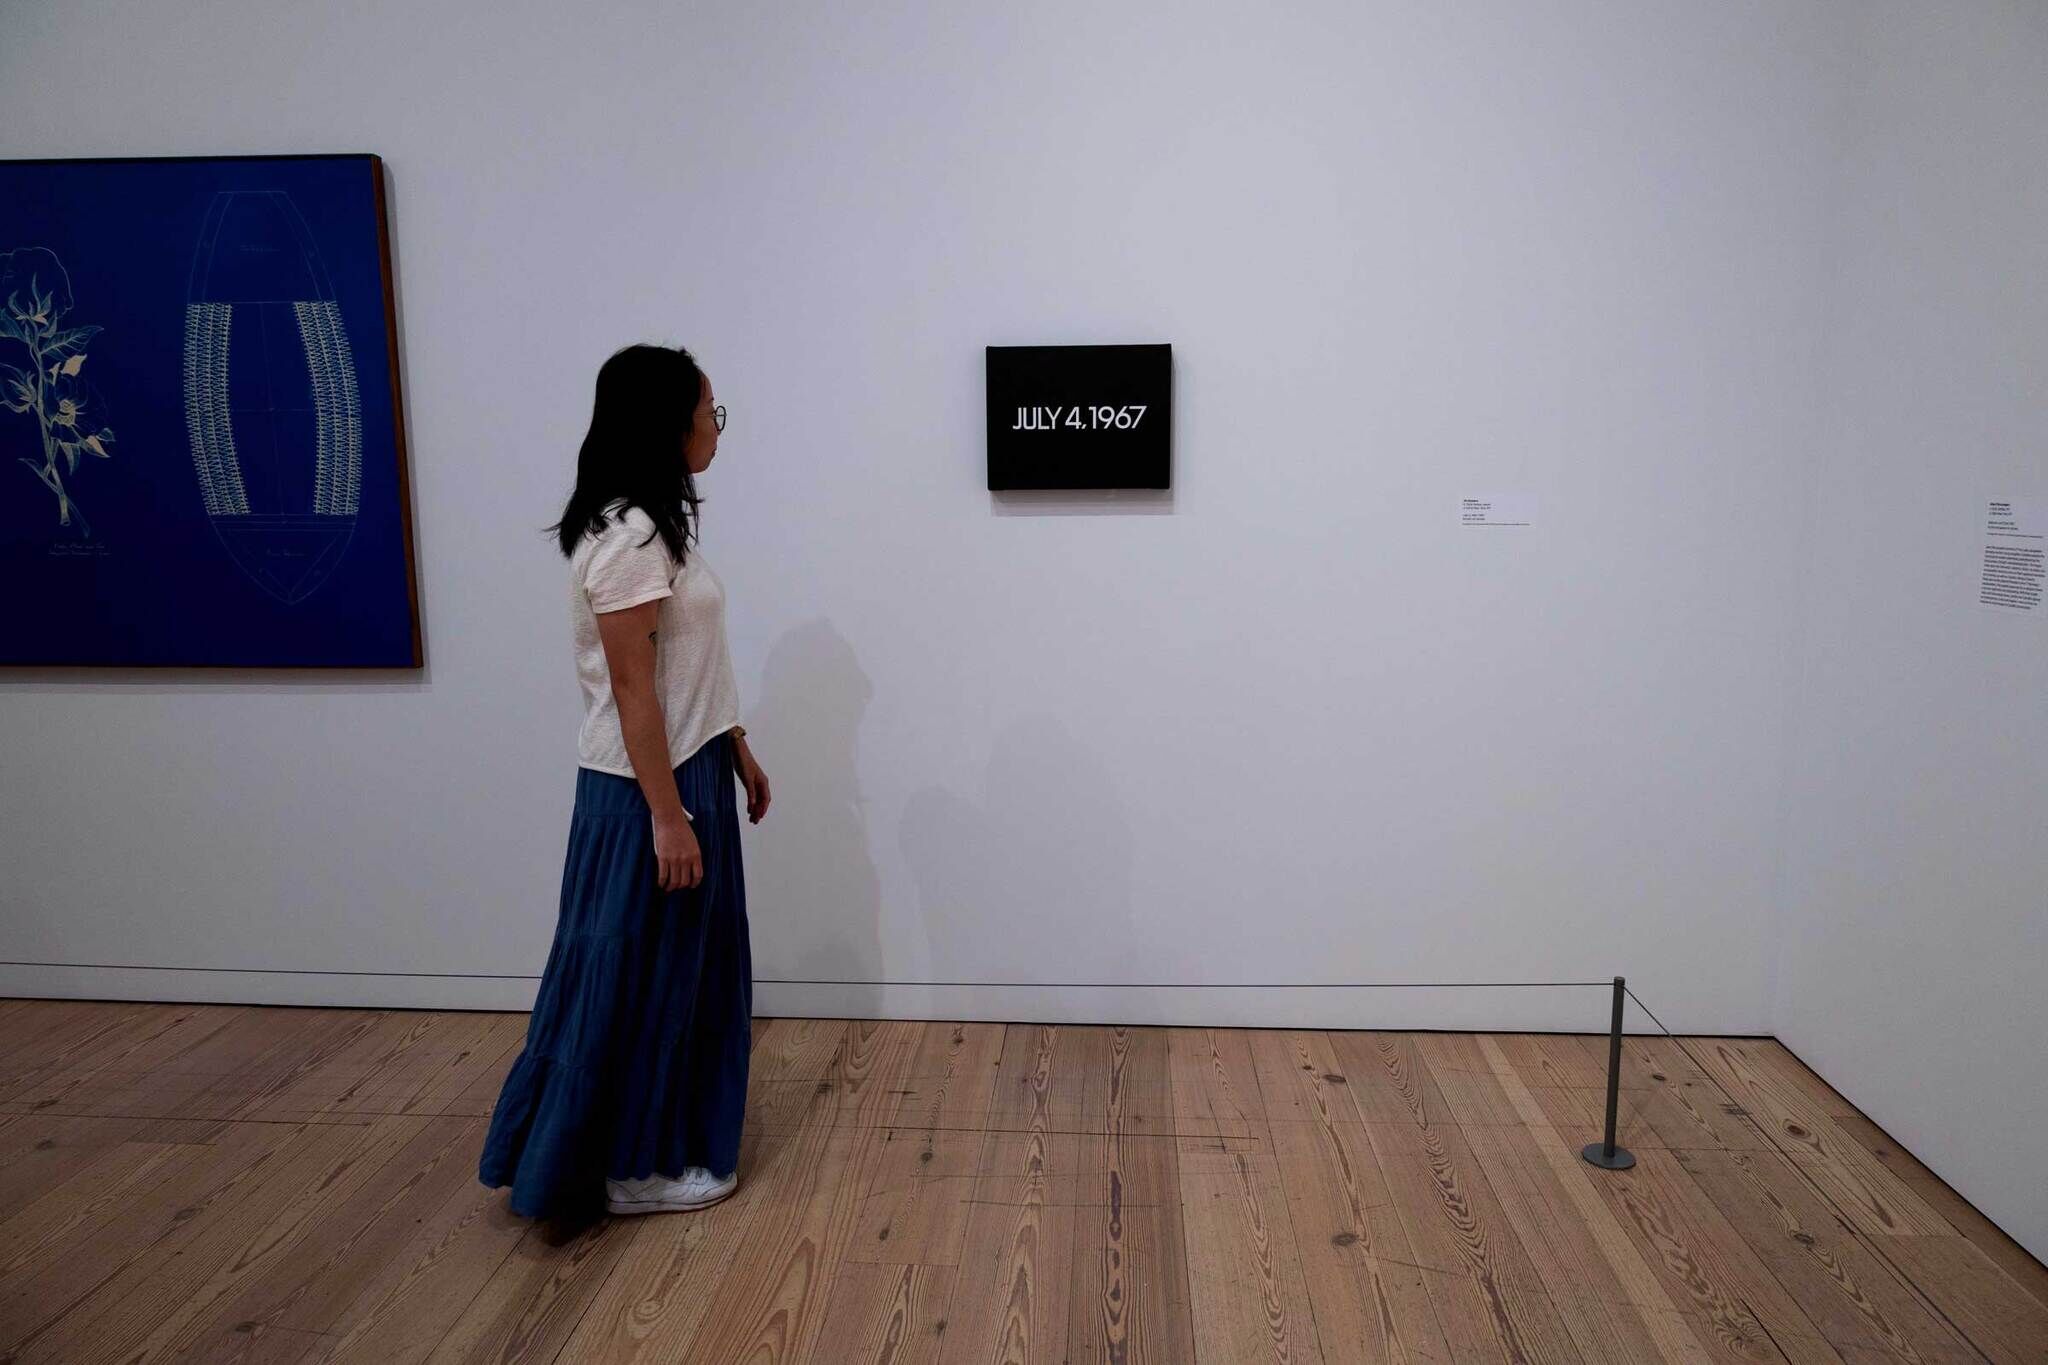 A woman in a white shirt and blue skirt looks at a painting with "JULY 4, 1967" in a gallery. A blue artwork is on the adjacent wall.